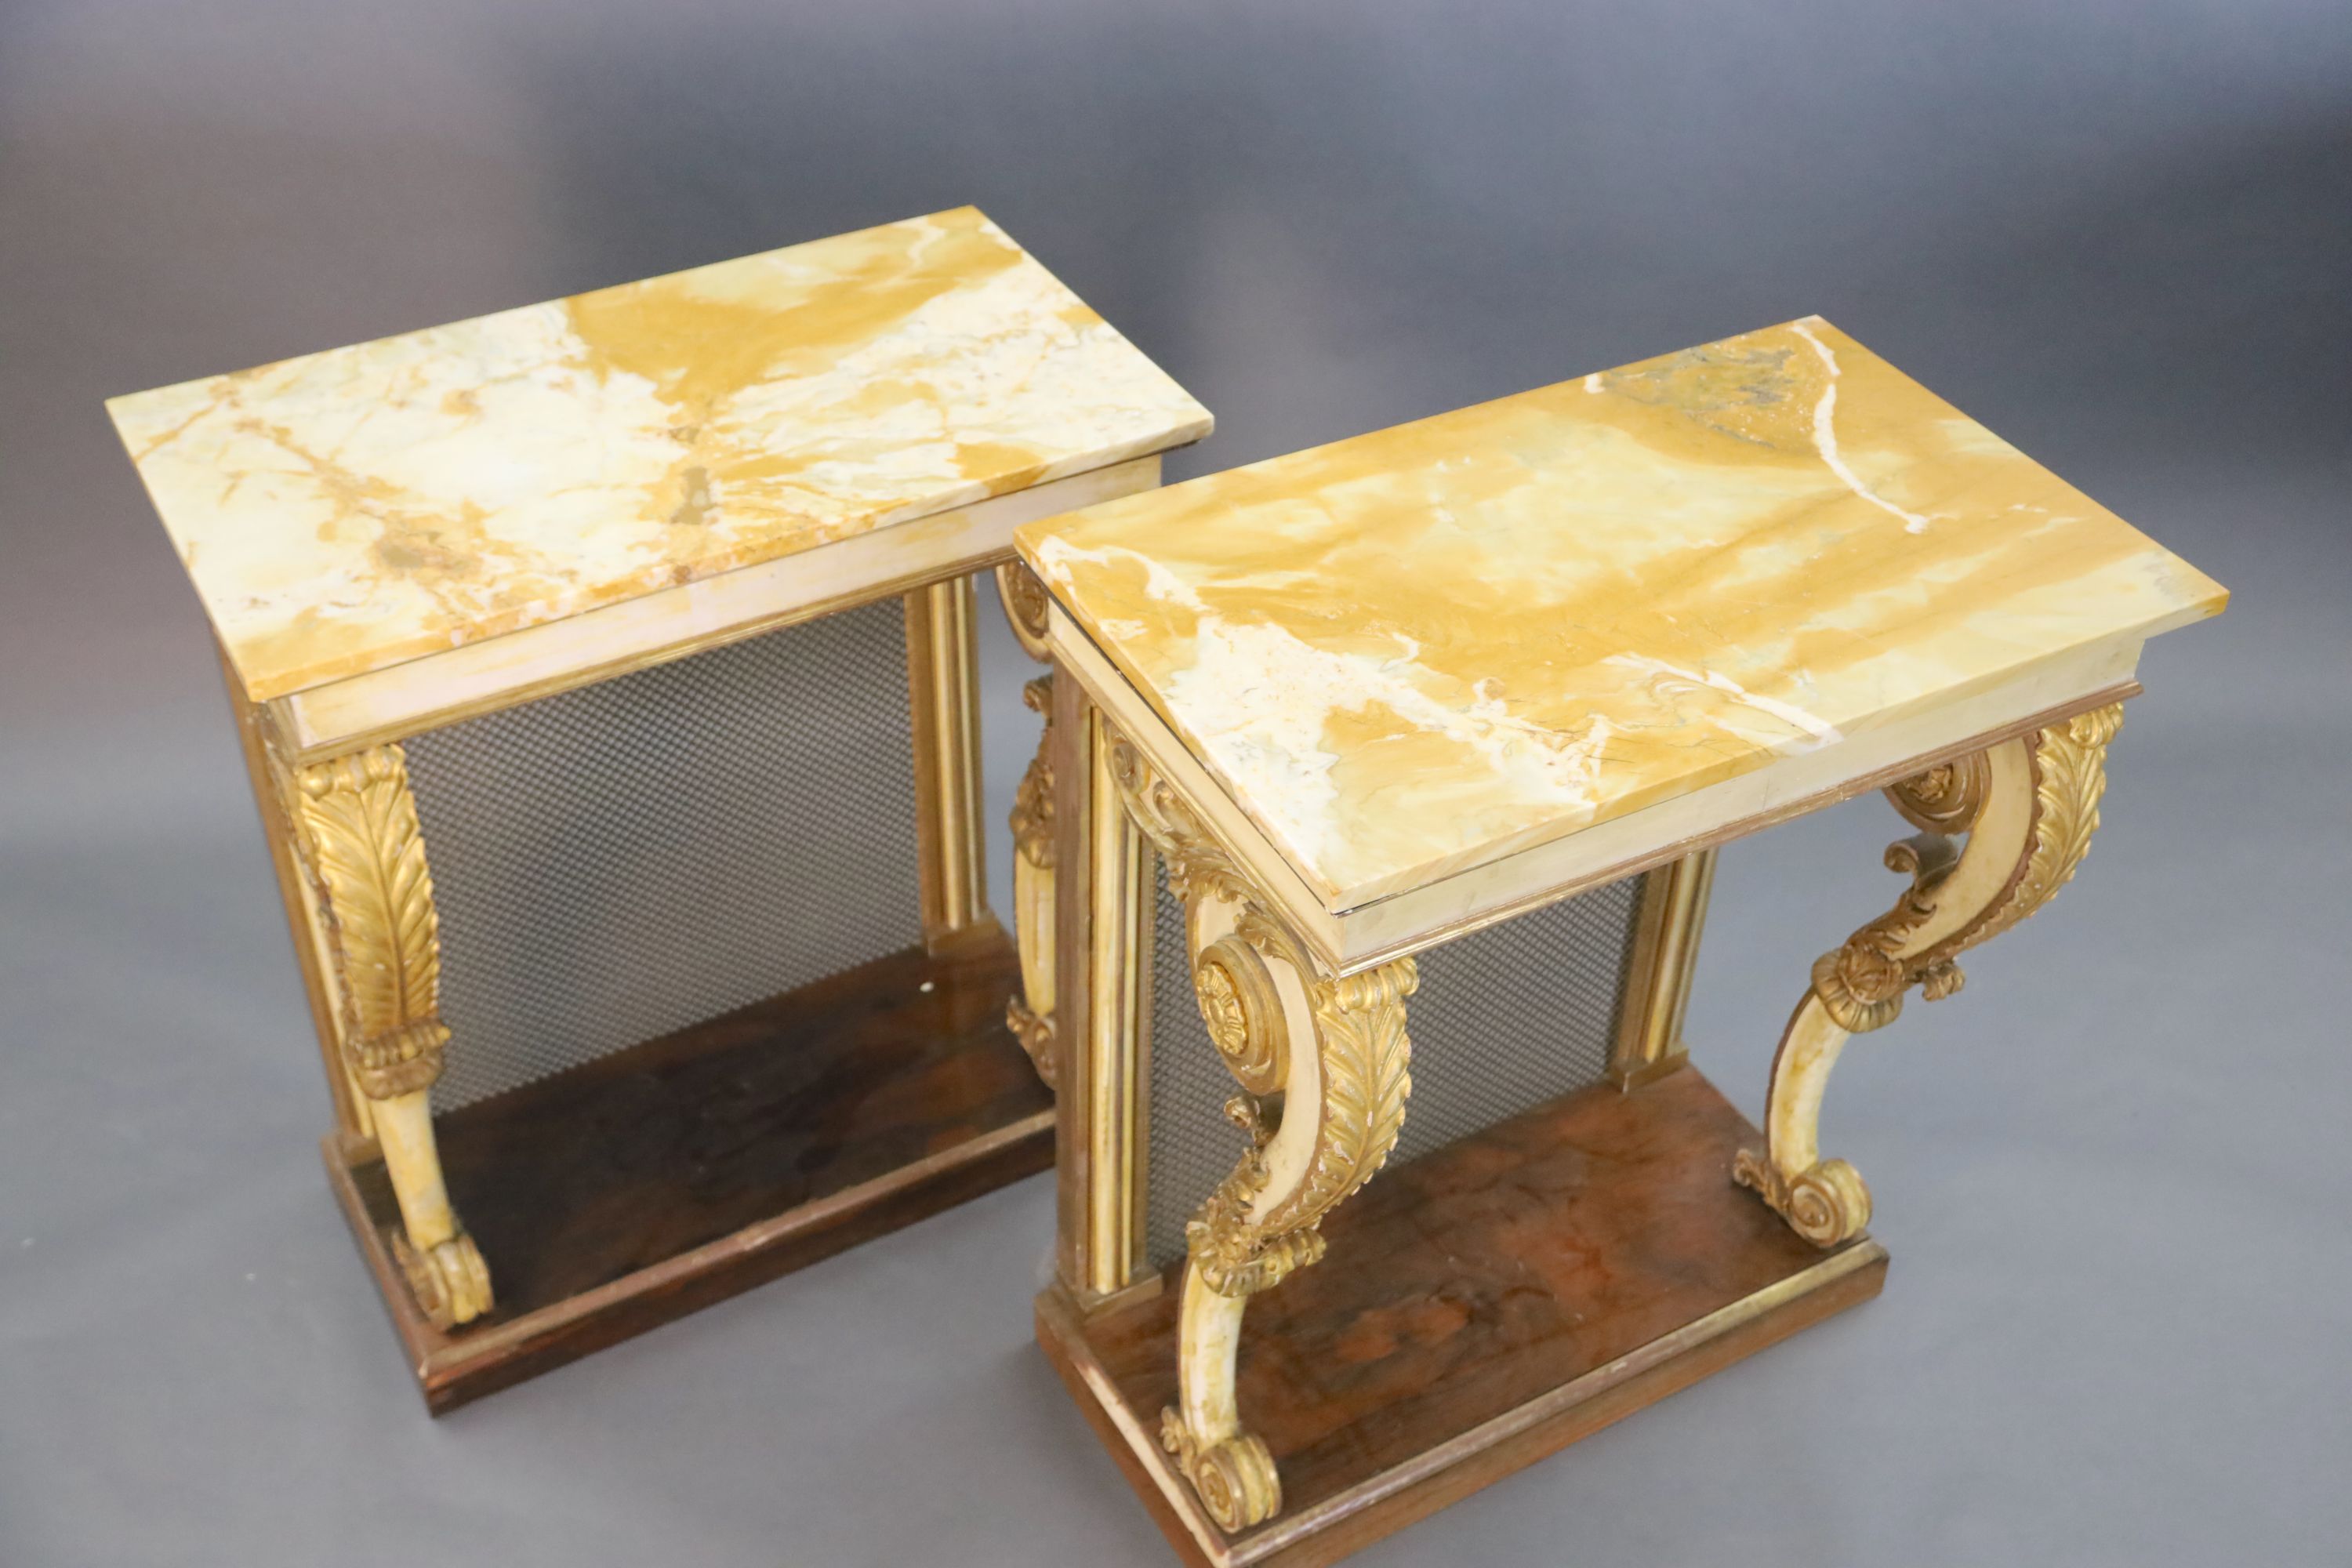 A pair of William IV parcel gilt cream painted and rosewood console tables, W.2ft 6in. D.1ft 6.5in. H.2ft 11.5in.